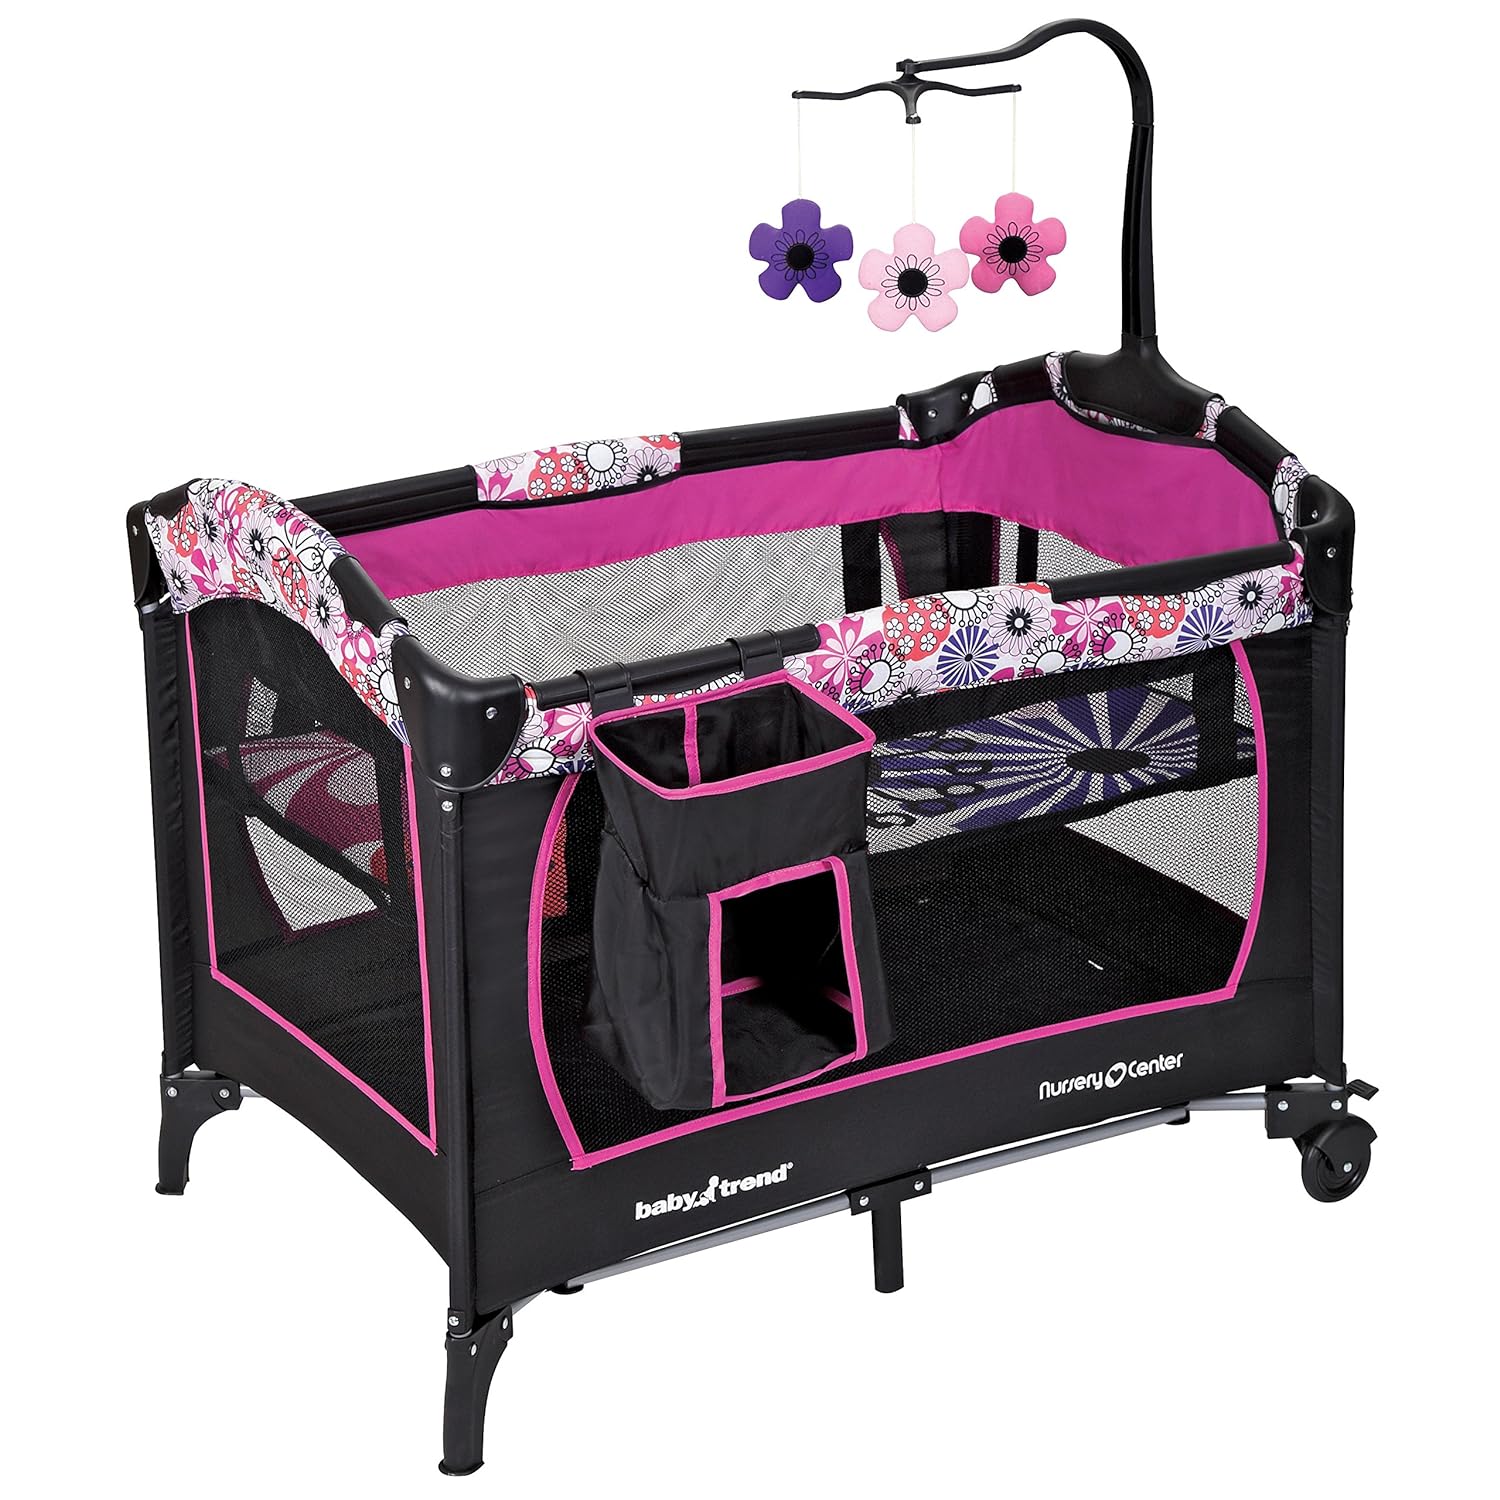 Baby Trend Nursery Center Playard (Various) from $58.12 & More + Free Shipping